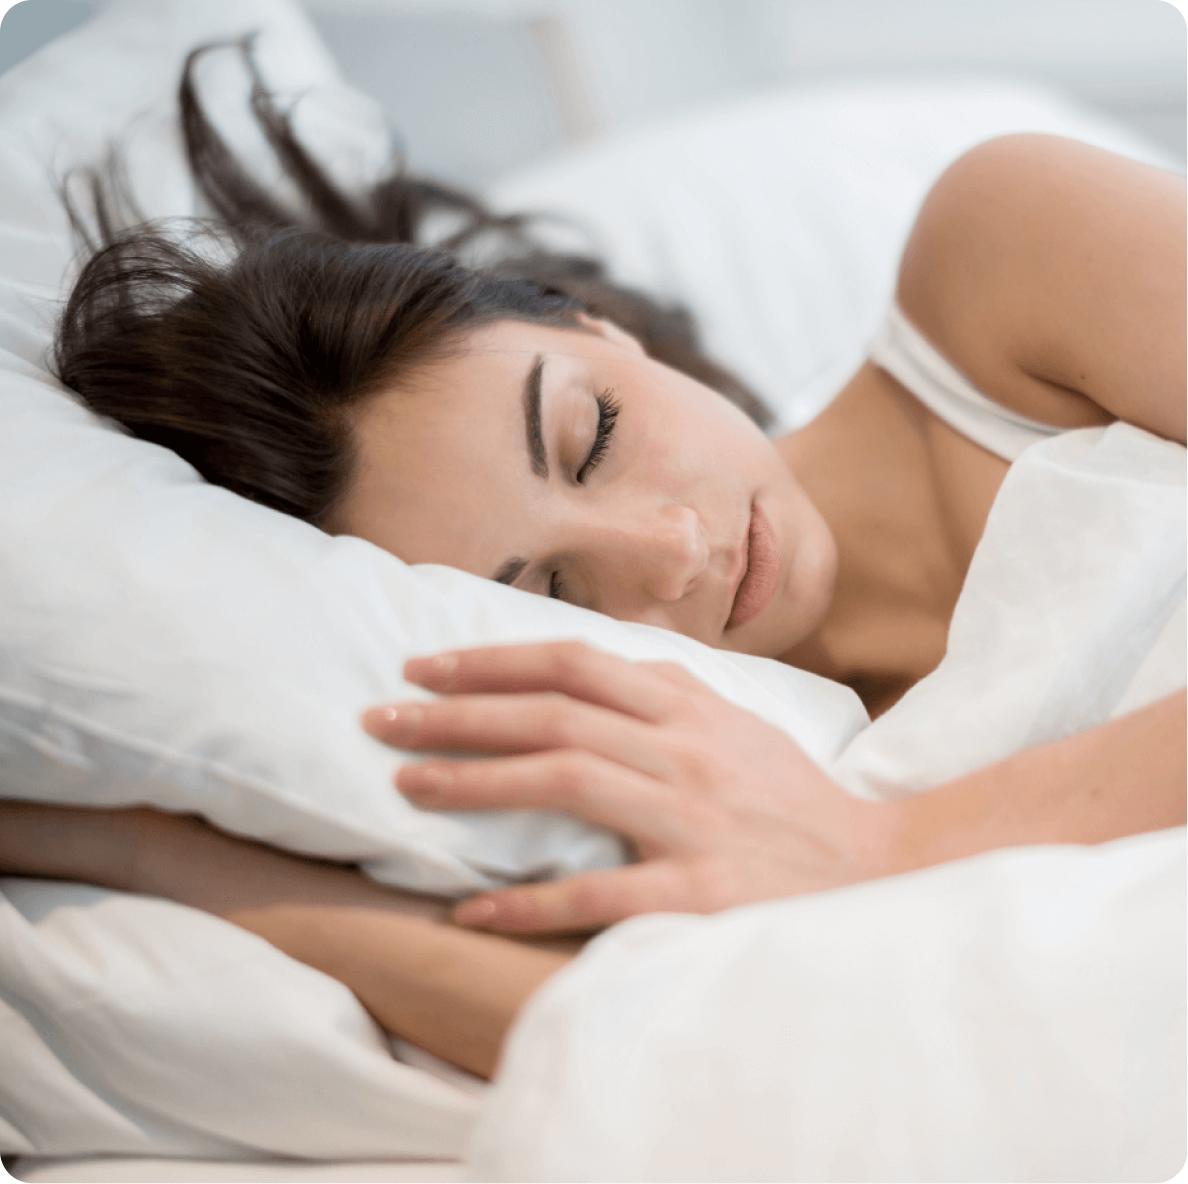 Image of a woman asleep in bed with all-white bedding